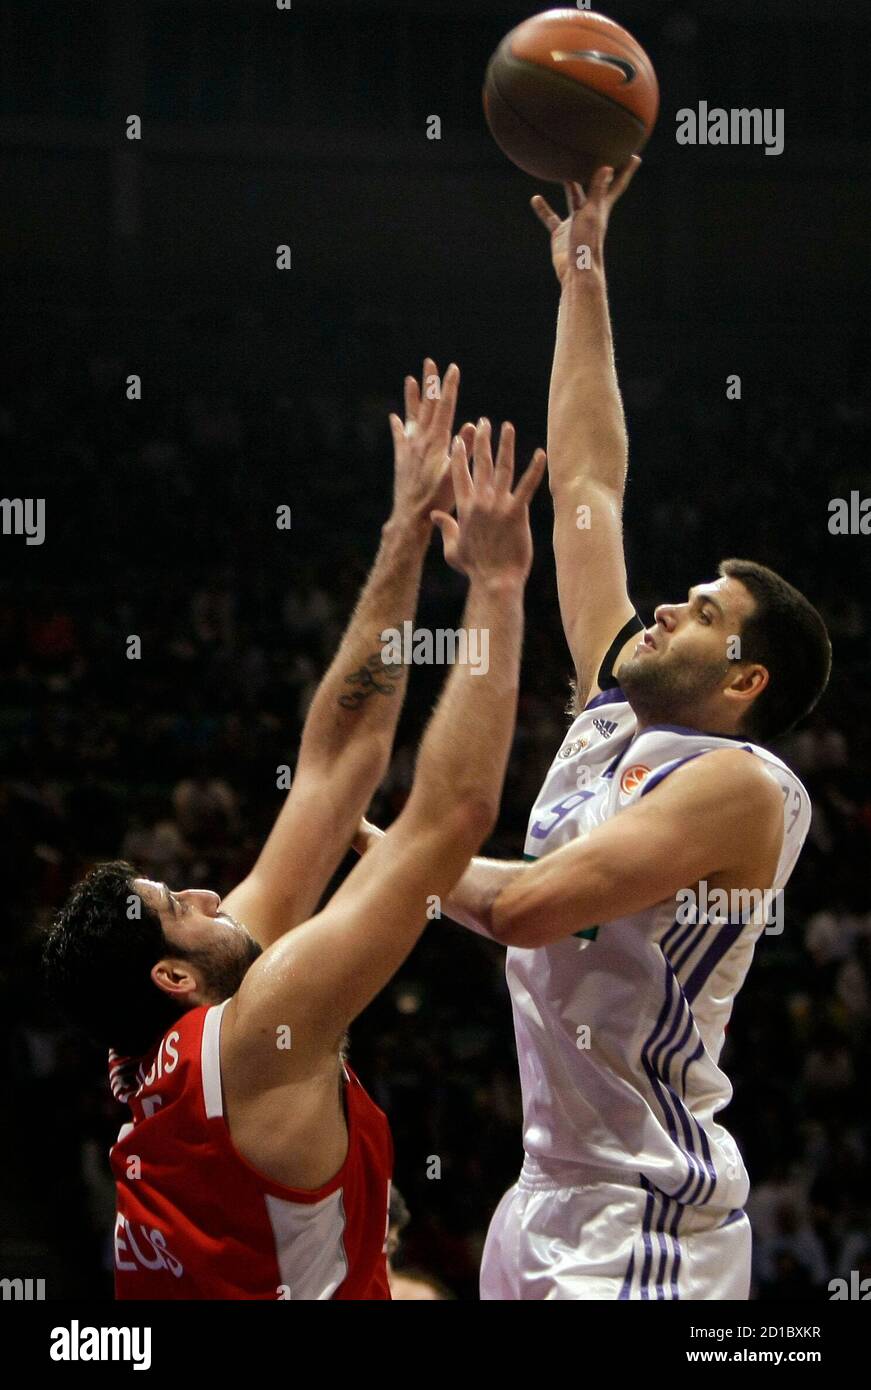 Real Madrid's Felipe Reyes (R) goes up for a basket past Olympiacos  Piraeus' Ioannis Bourousis during their Euroleague men's basketball game in  Madrid March 31, 2009. REUTERS/Juan Medina (SPAIN Stock Photo - Alamy